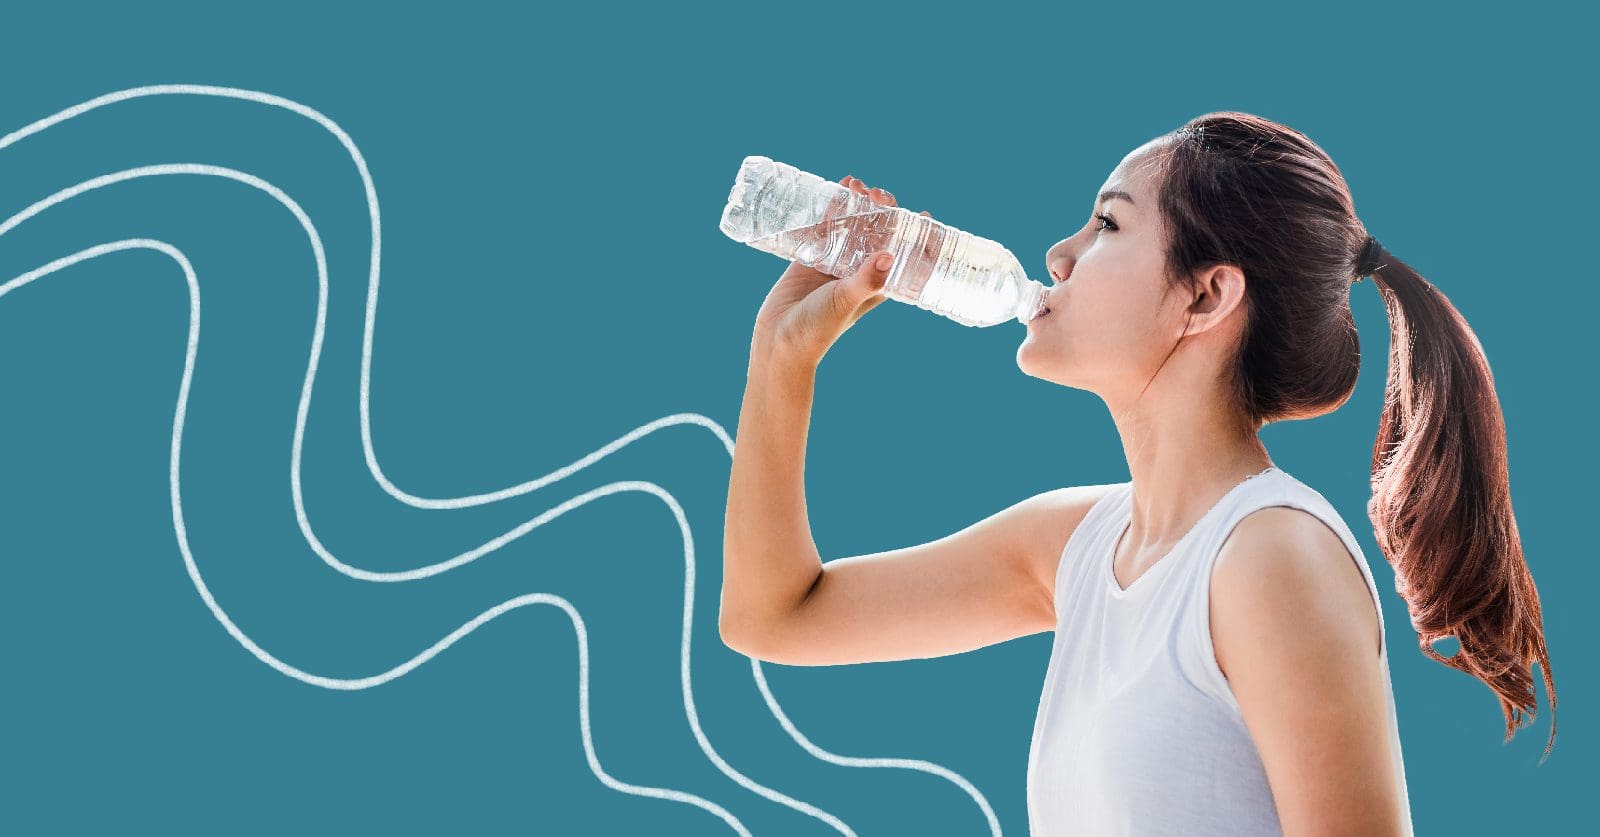 Hydrate with water to keep your mind fresh and sharp